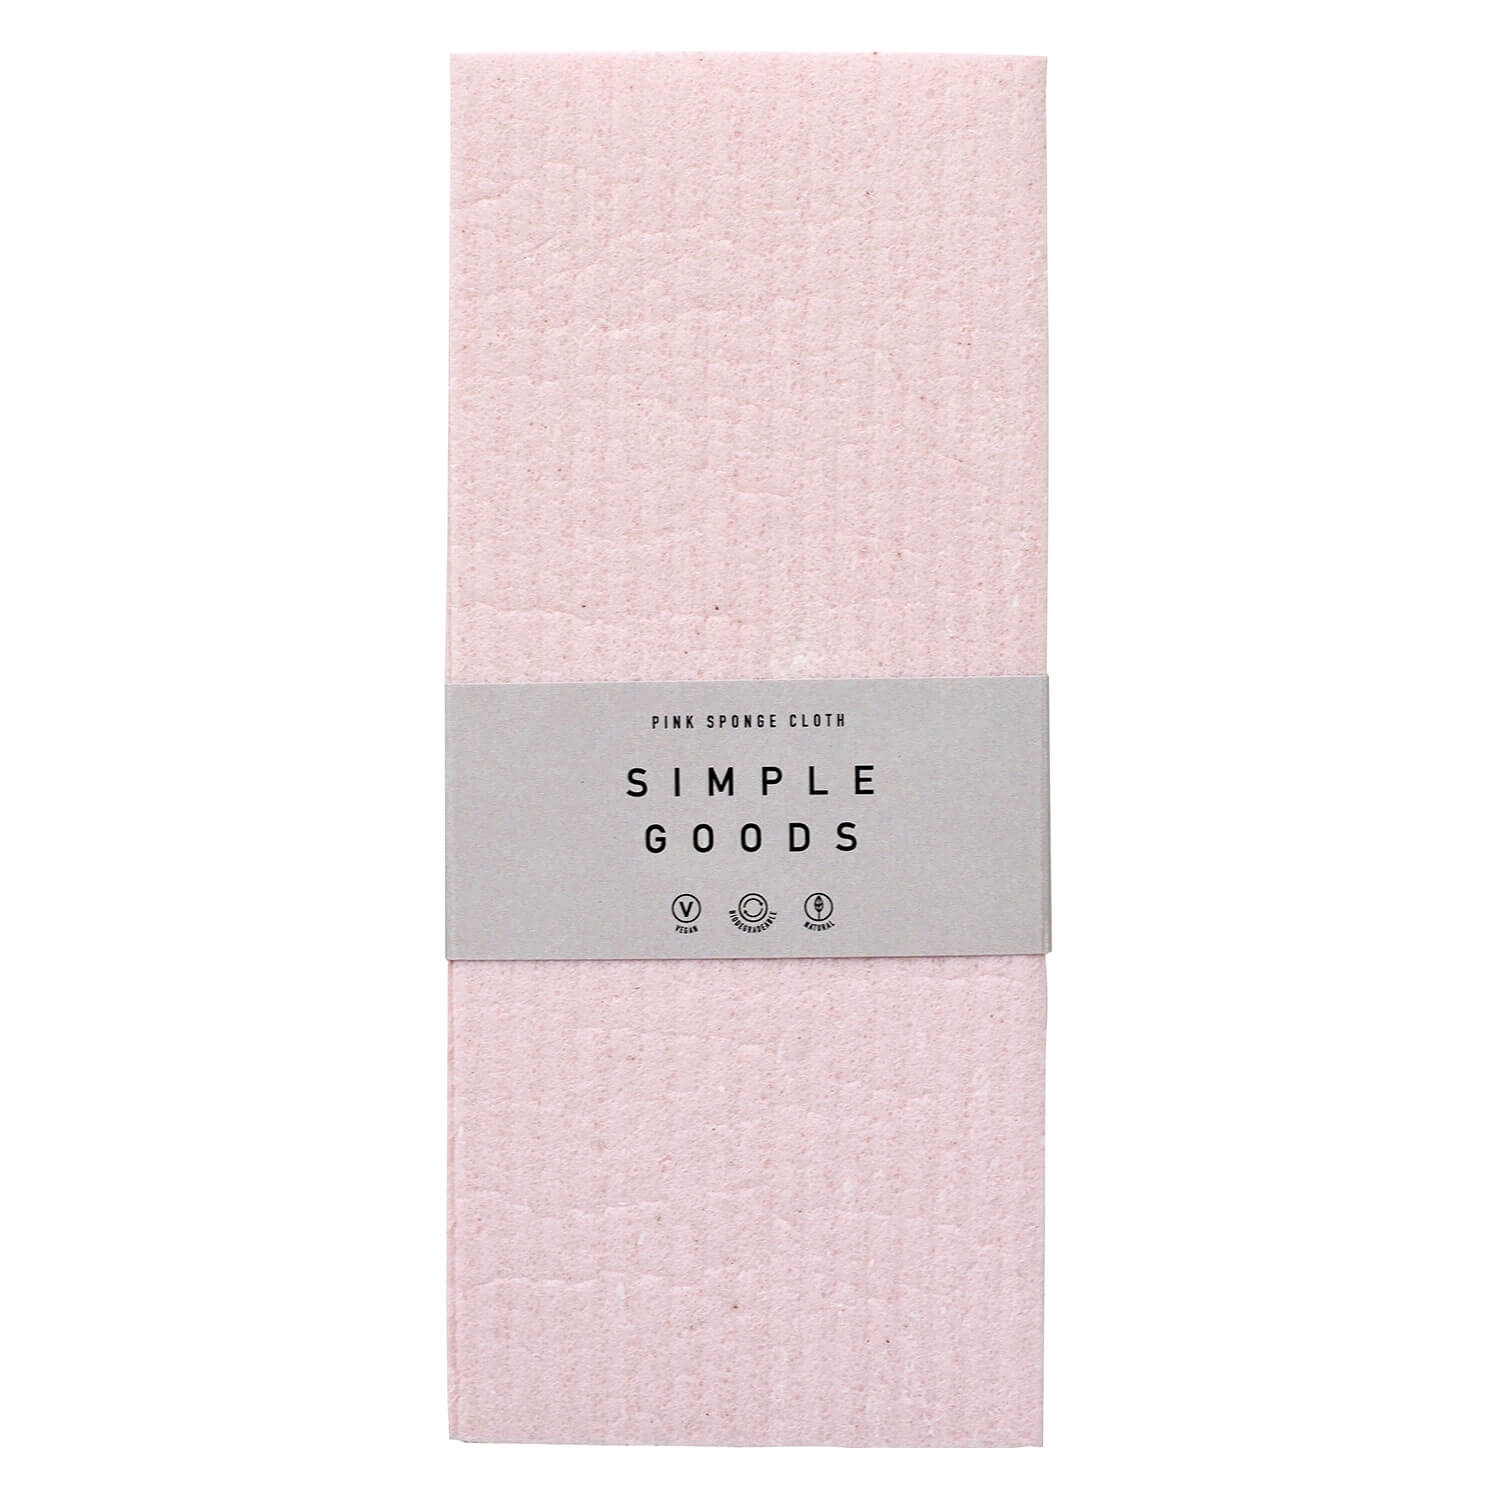 Product image from SIMPLE GOODS - Sponge Cloth Pink